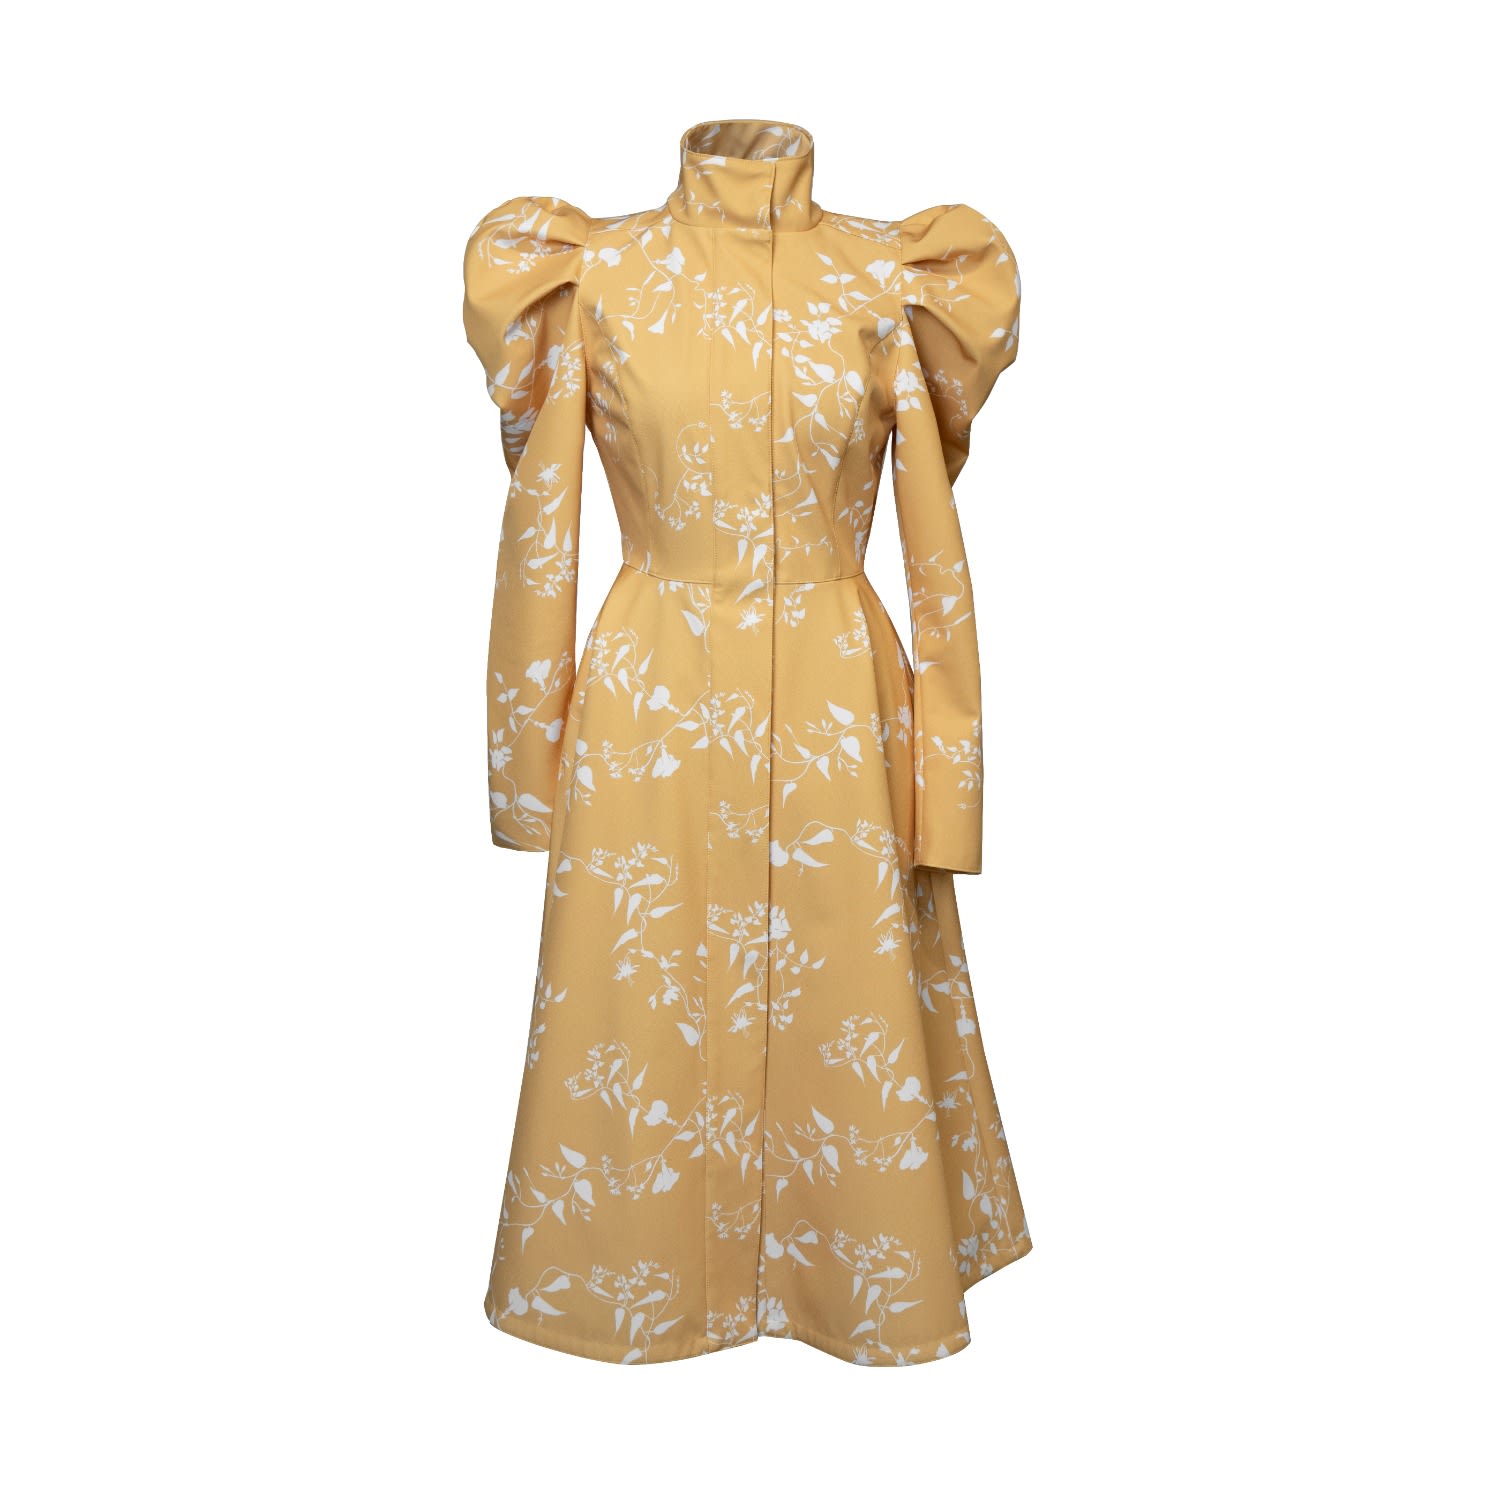 Rainsisters Women's Yellow / Orange Yellow Coat With Balloon-styled Sleeves And White Floral Print: Majestic Yel